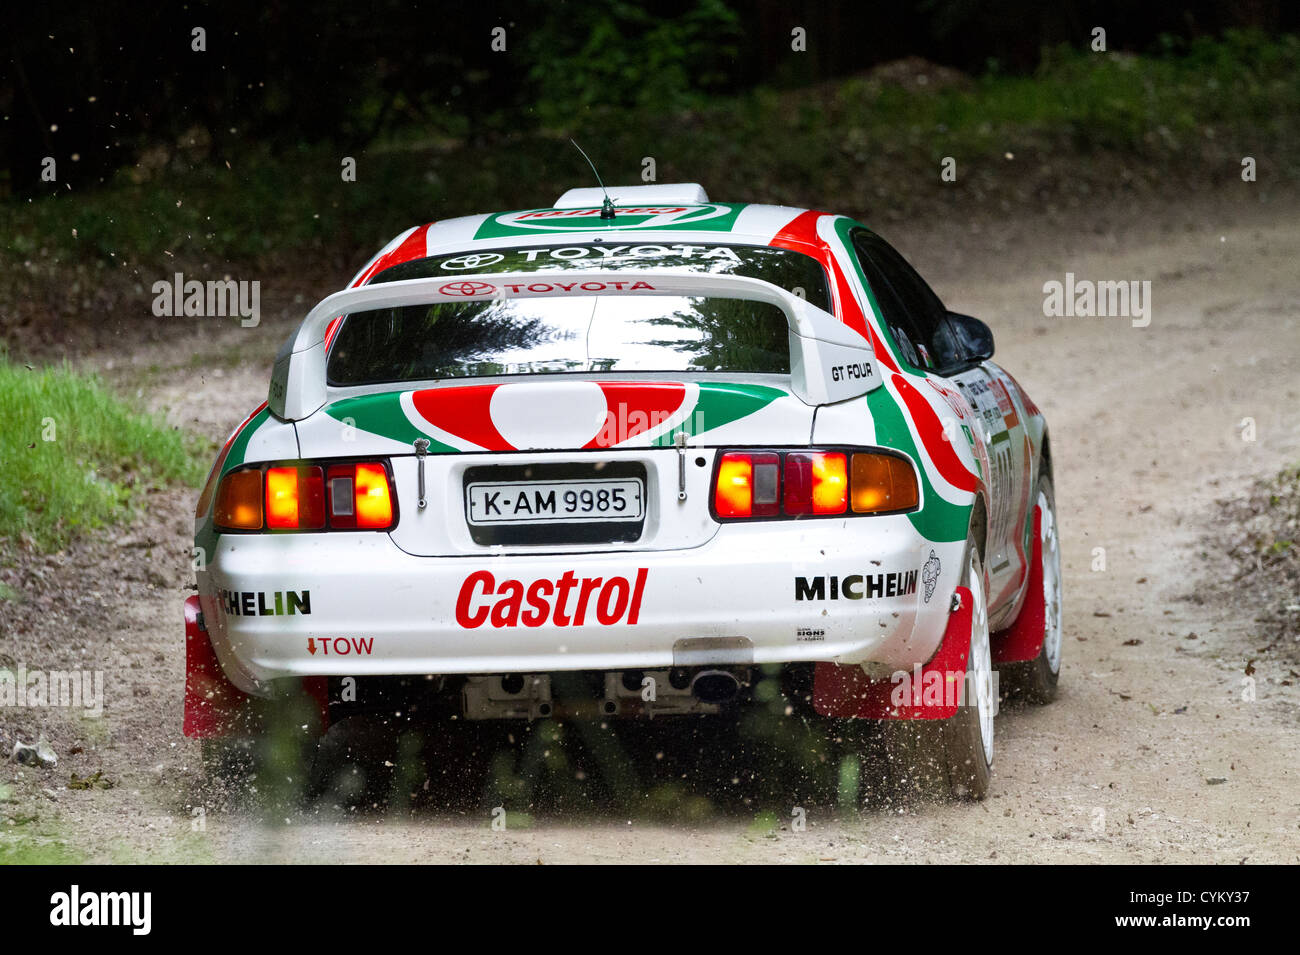 1995 Toyota Celica GT-Four ST205 rally car with driver Mark Courtney at the 2012 Goodwood Festival of Speed, Sussex, England, UK Stock Photo